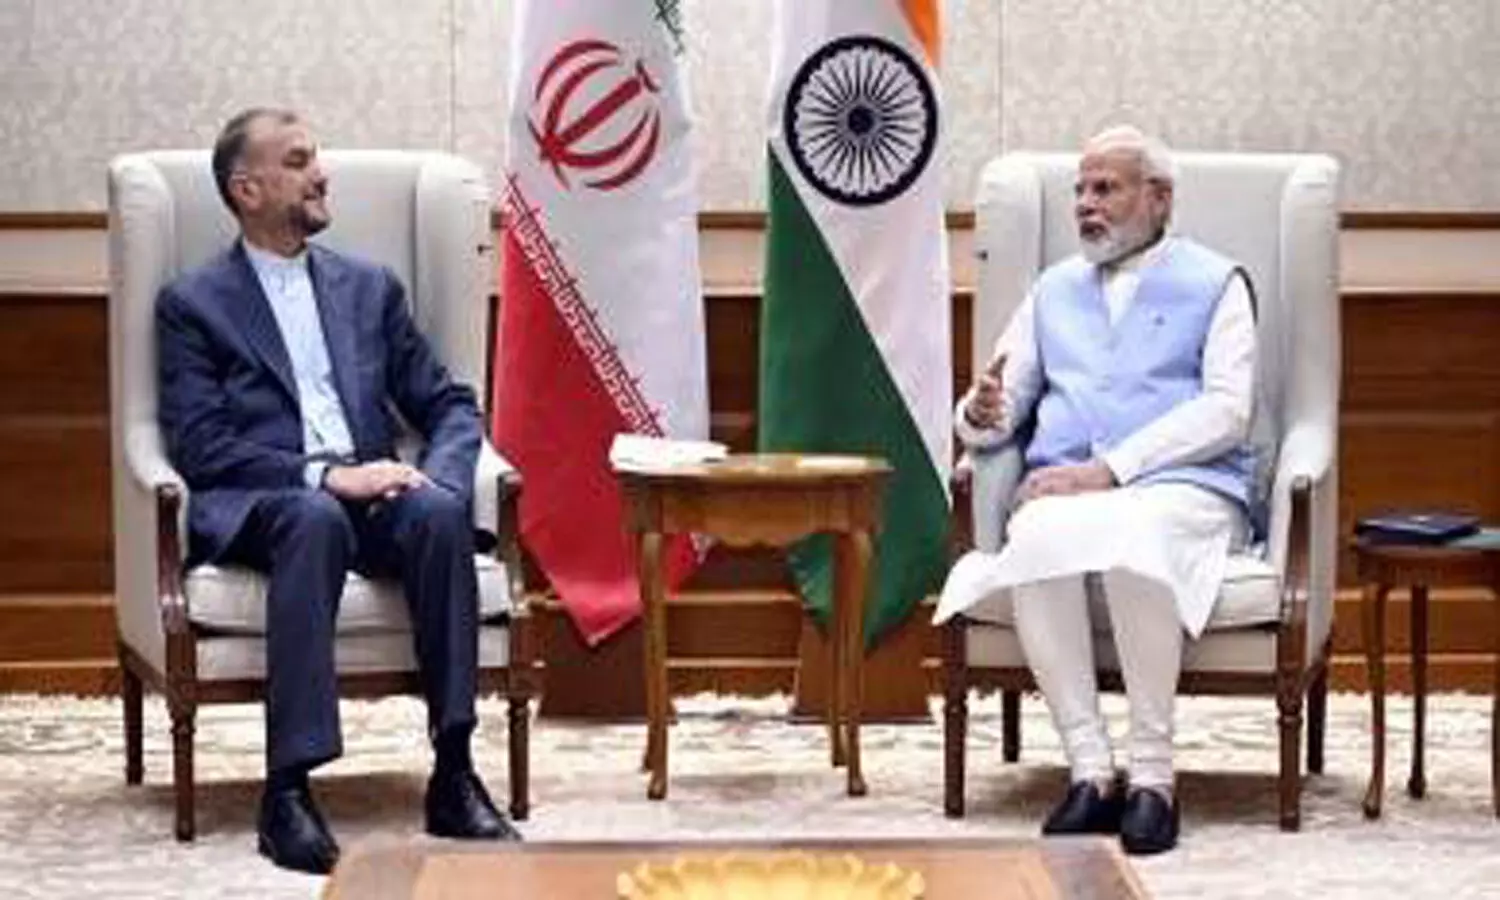 Prophet Mohammad remark row: Satisfied with Indias stance, says Iran